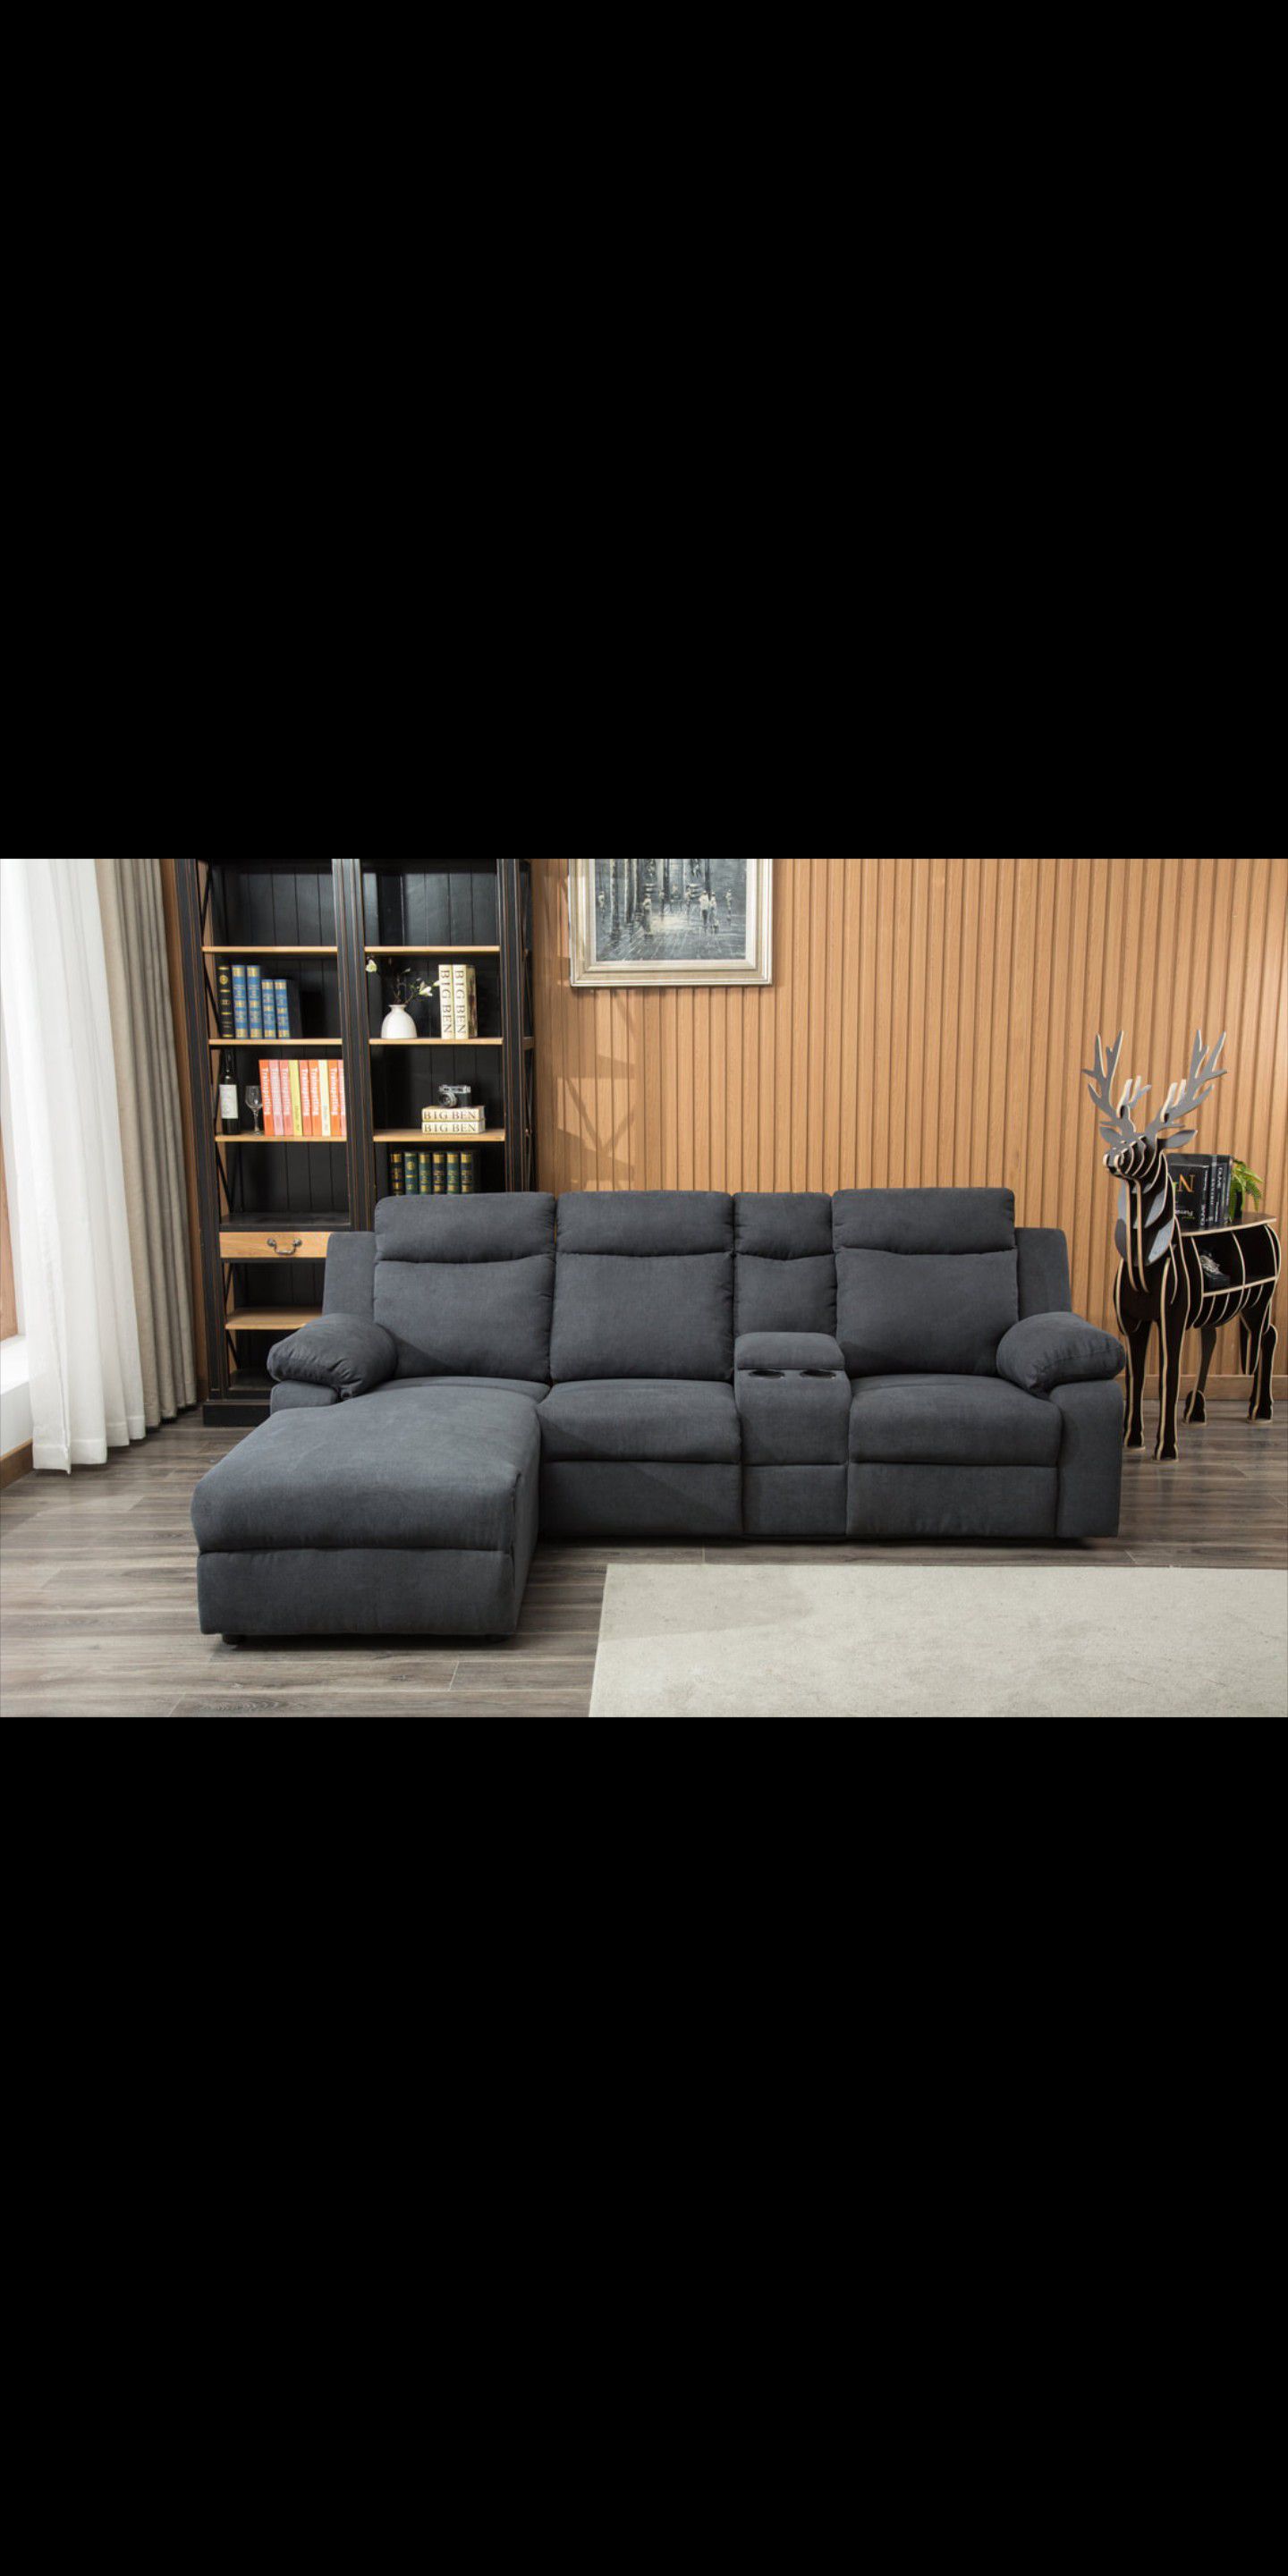 New Grey Recliner Sectional